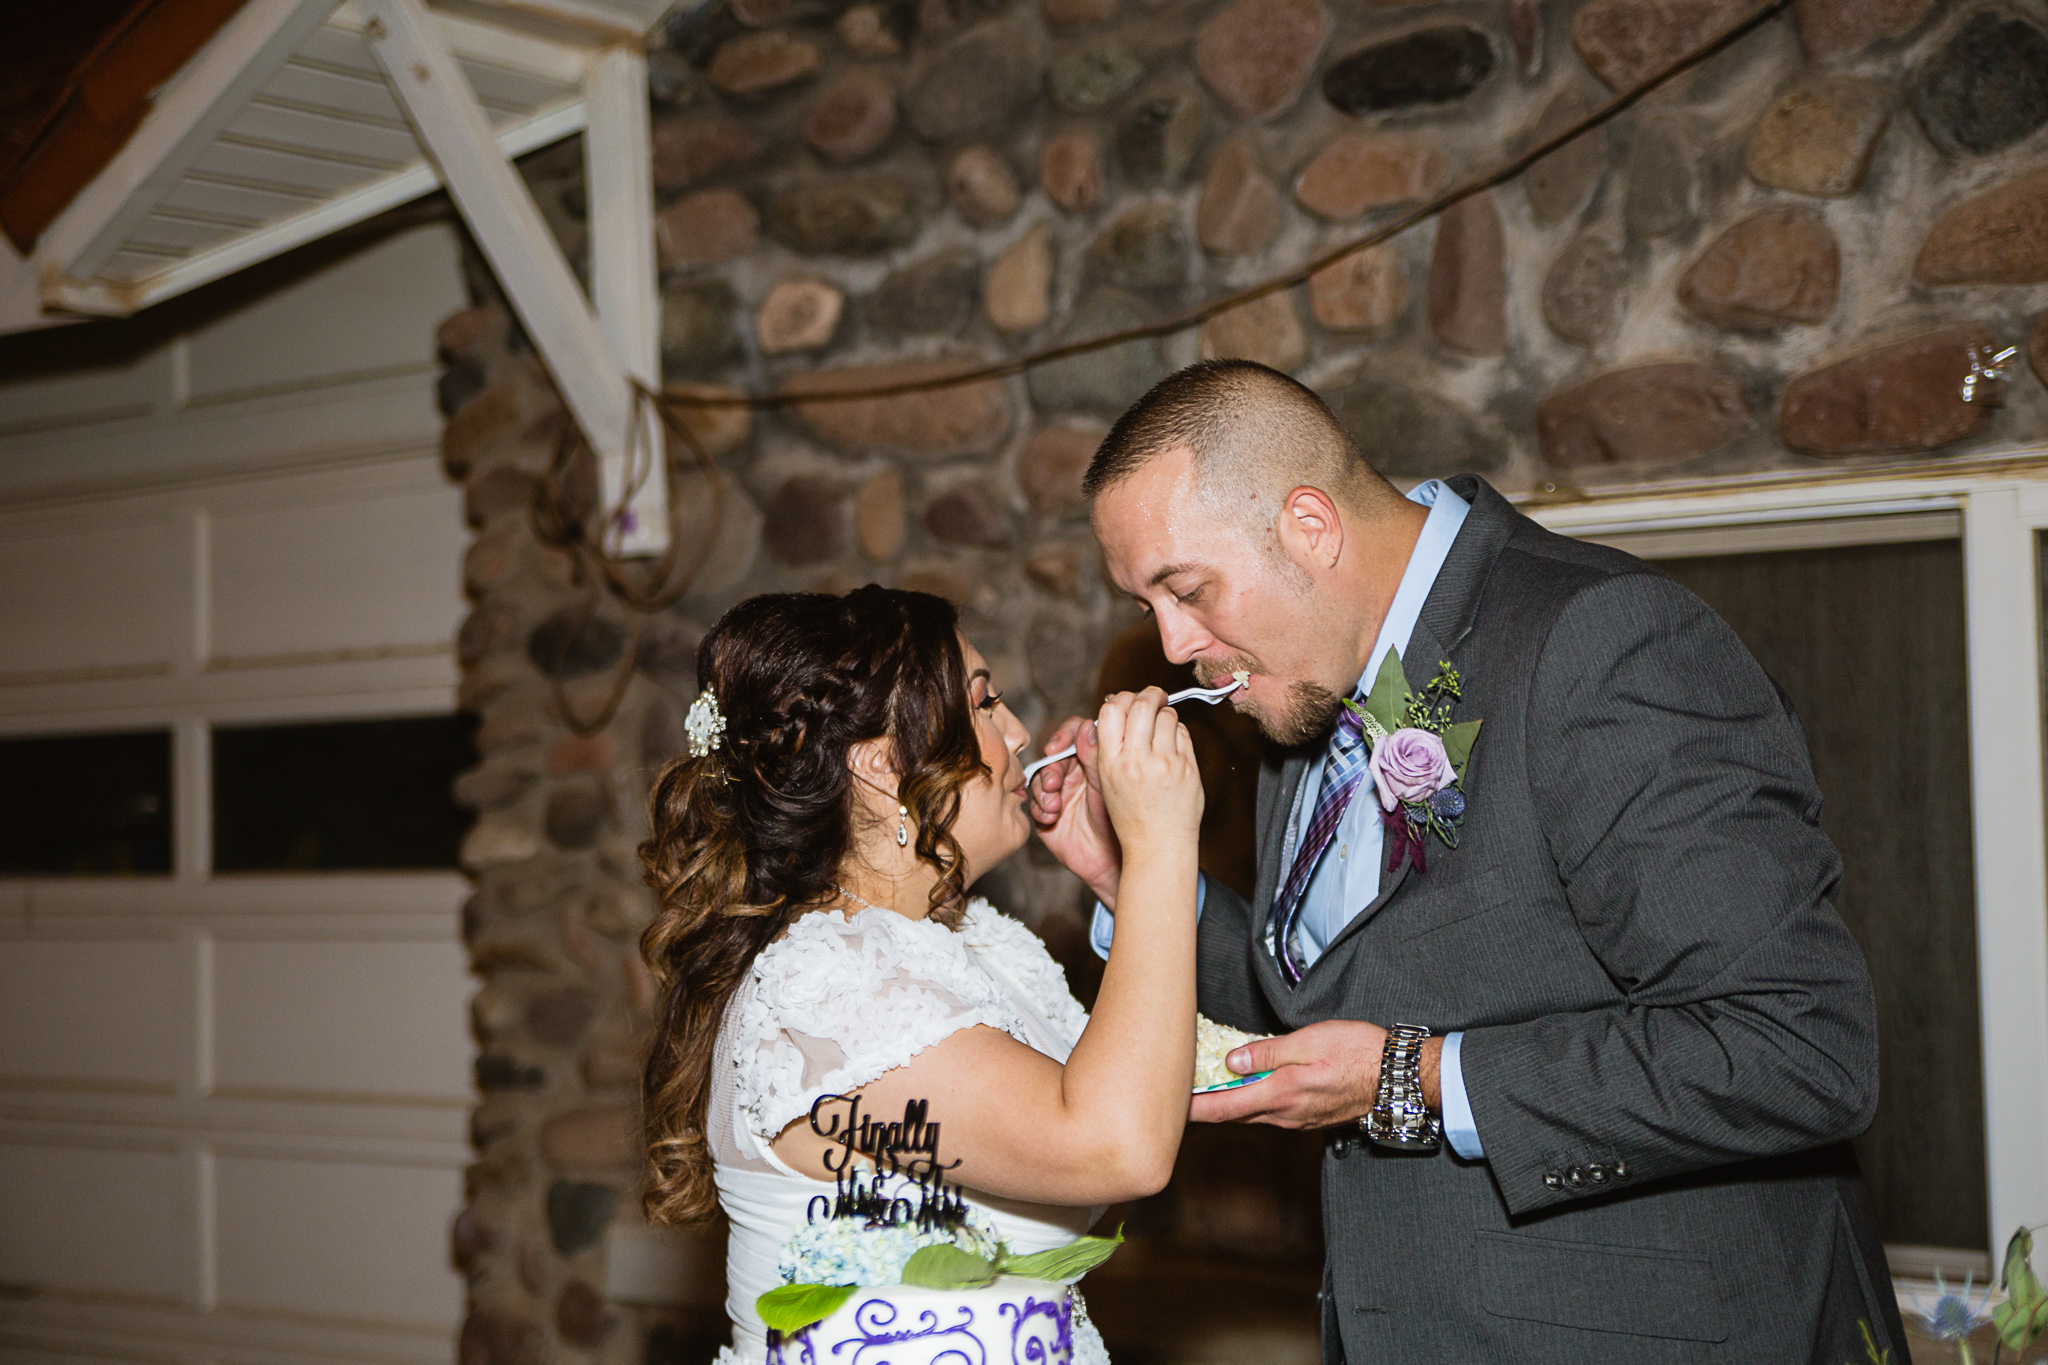 Bride and groom cut the cake at their wedding reception by PMA Photography.